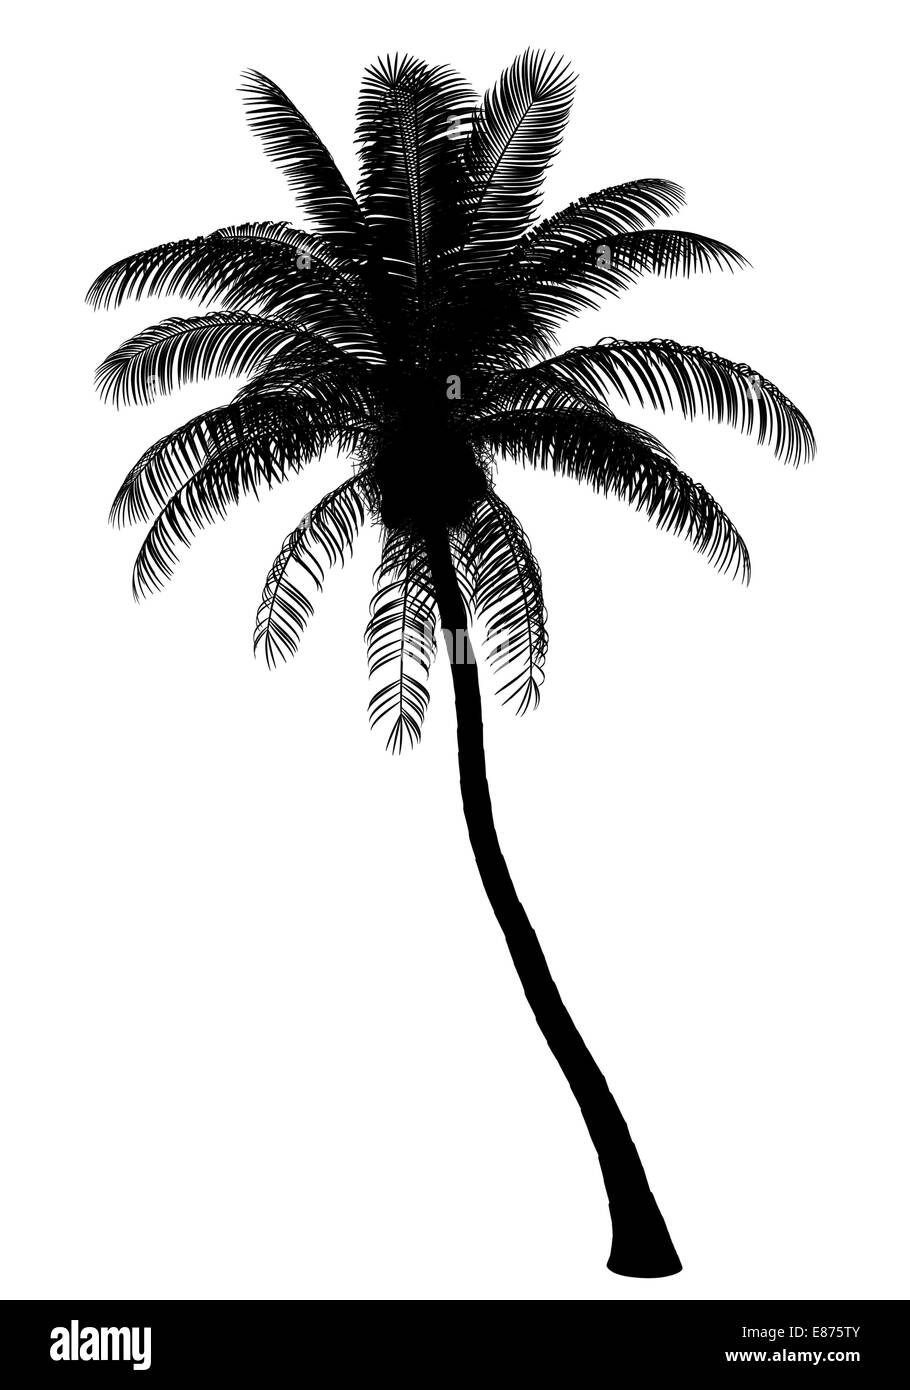 silhouette of coconut palm tree isolated on white background Stock Photo